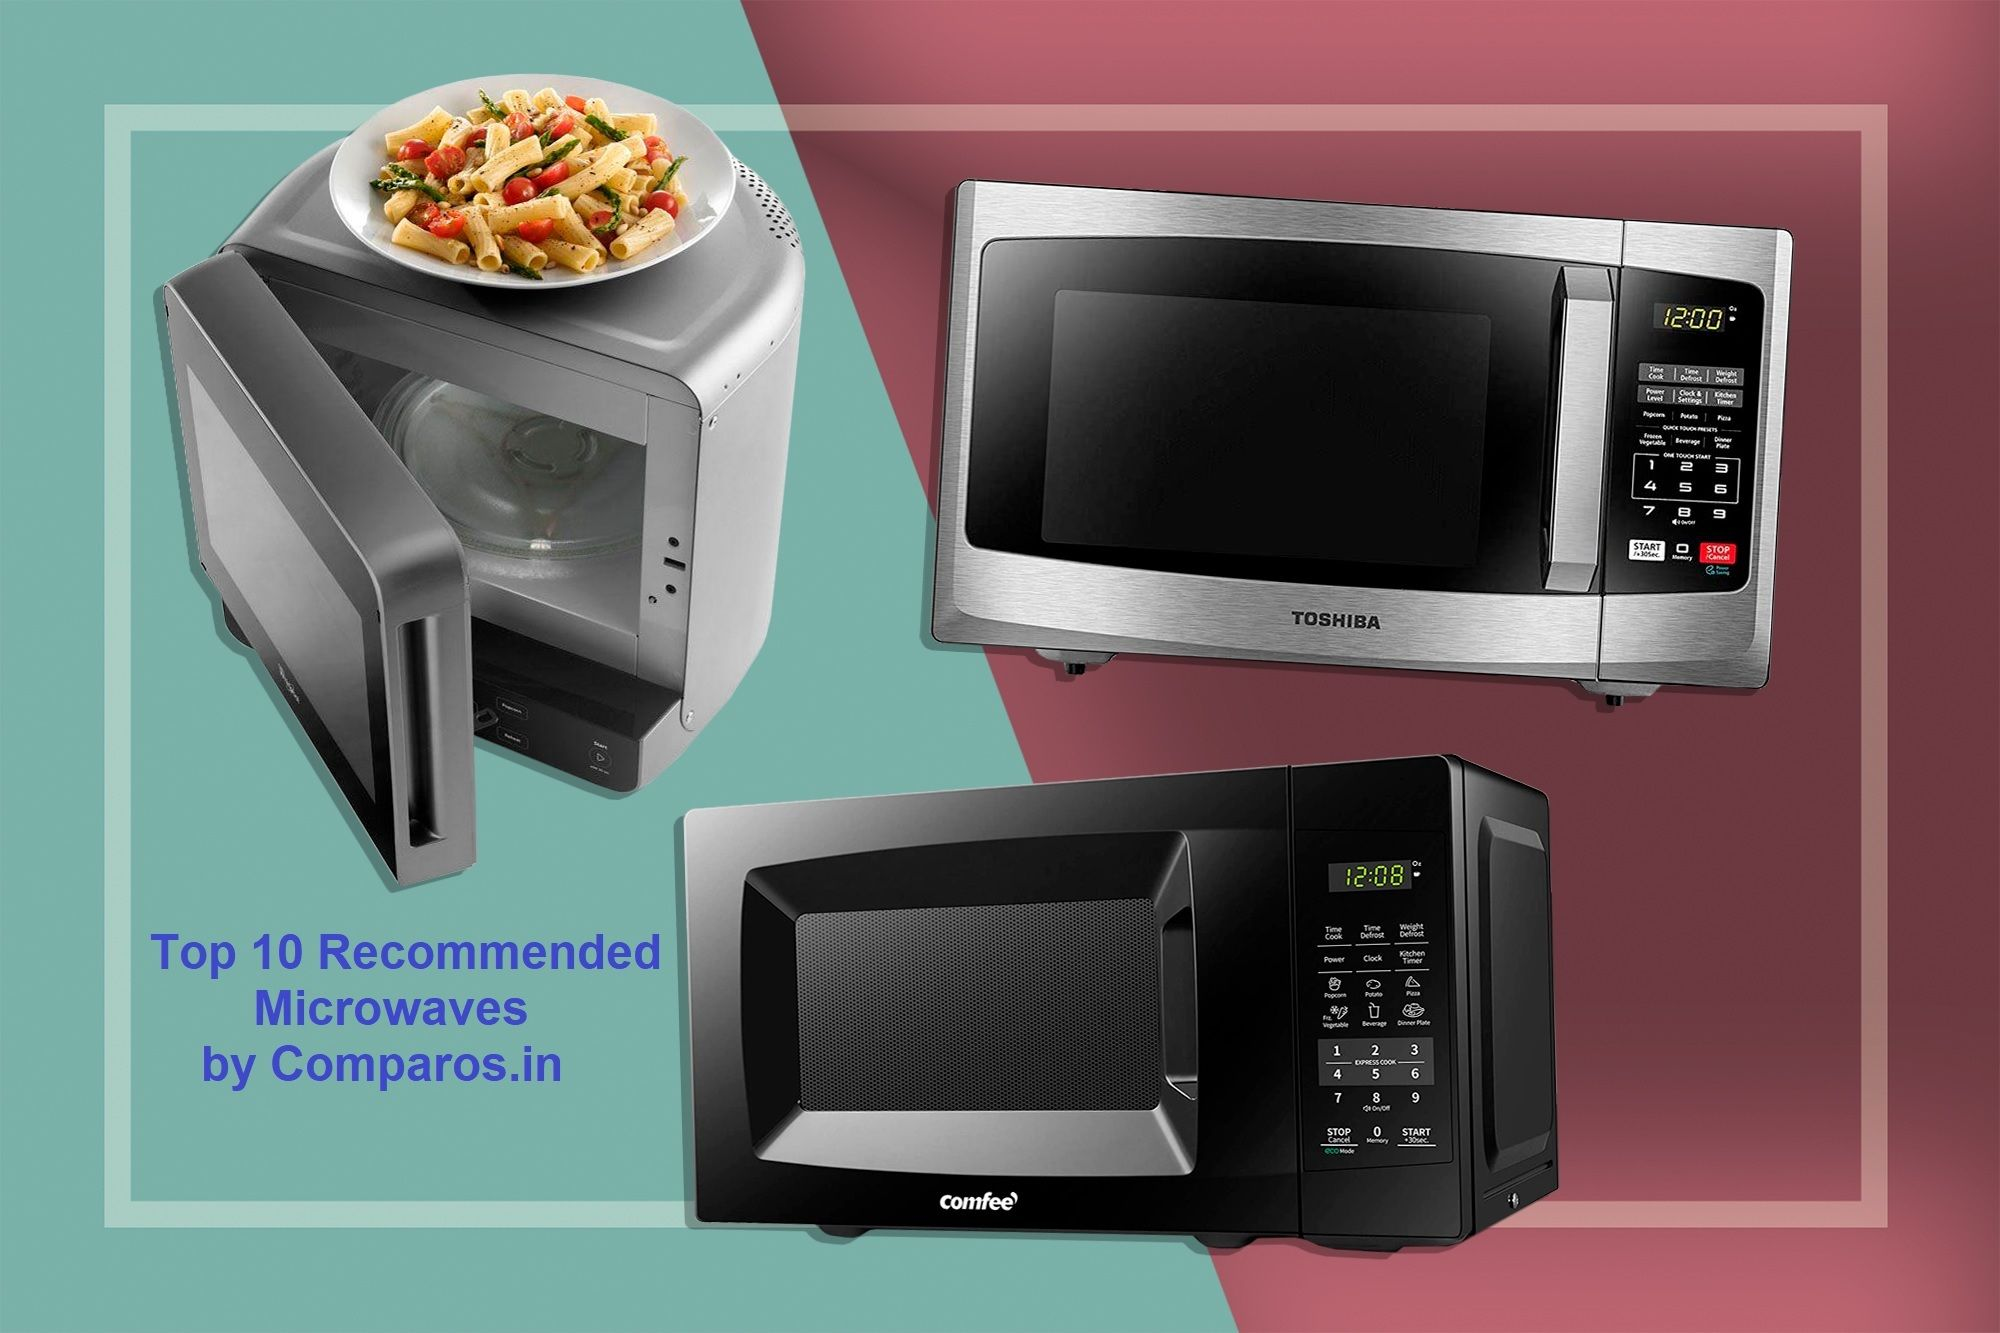 Top 10 recommended microwaves for home